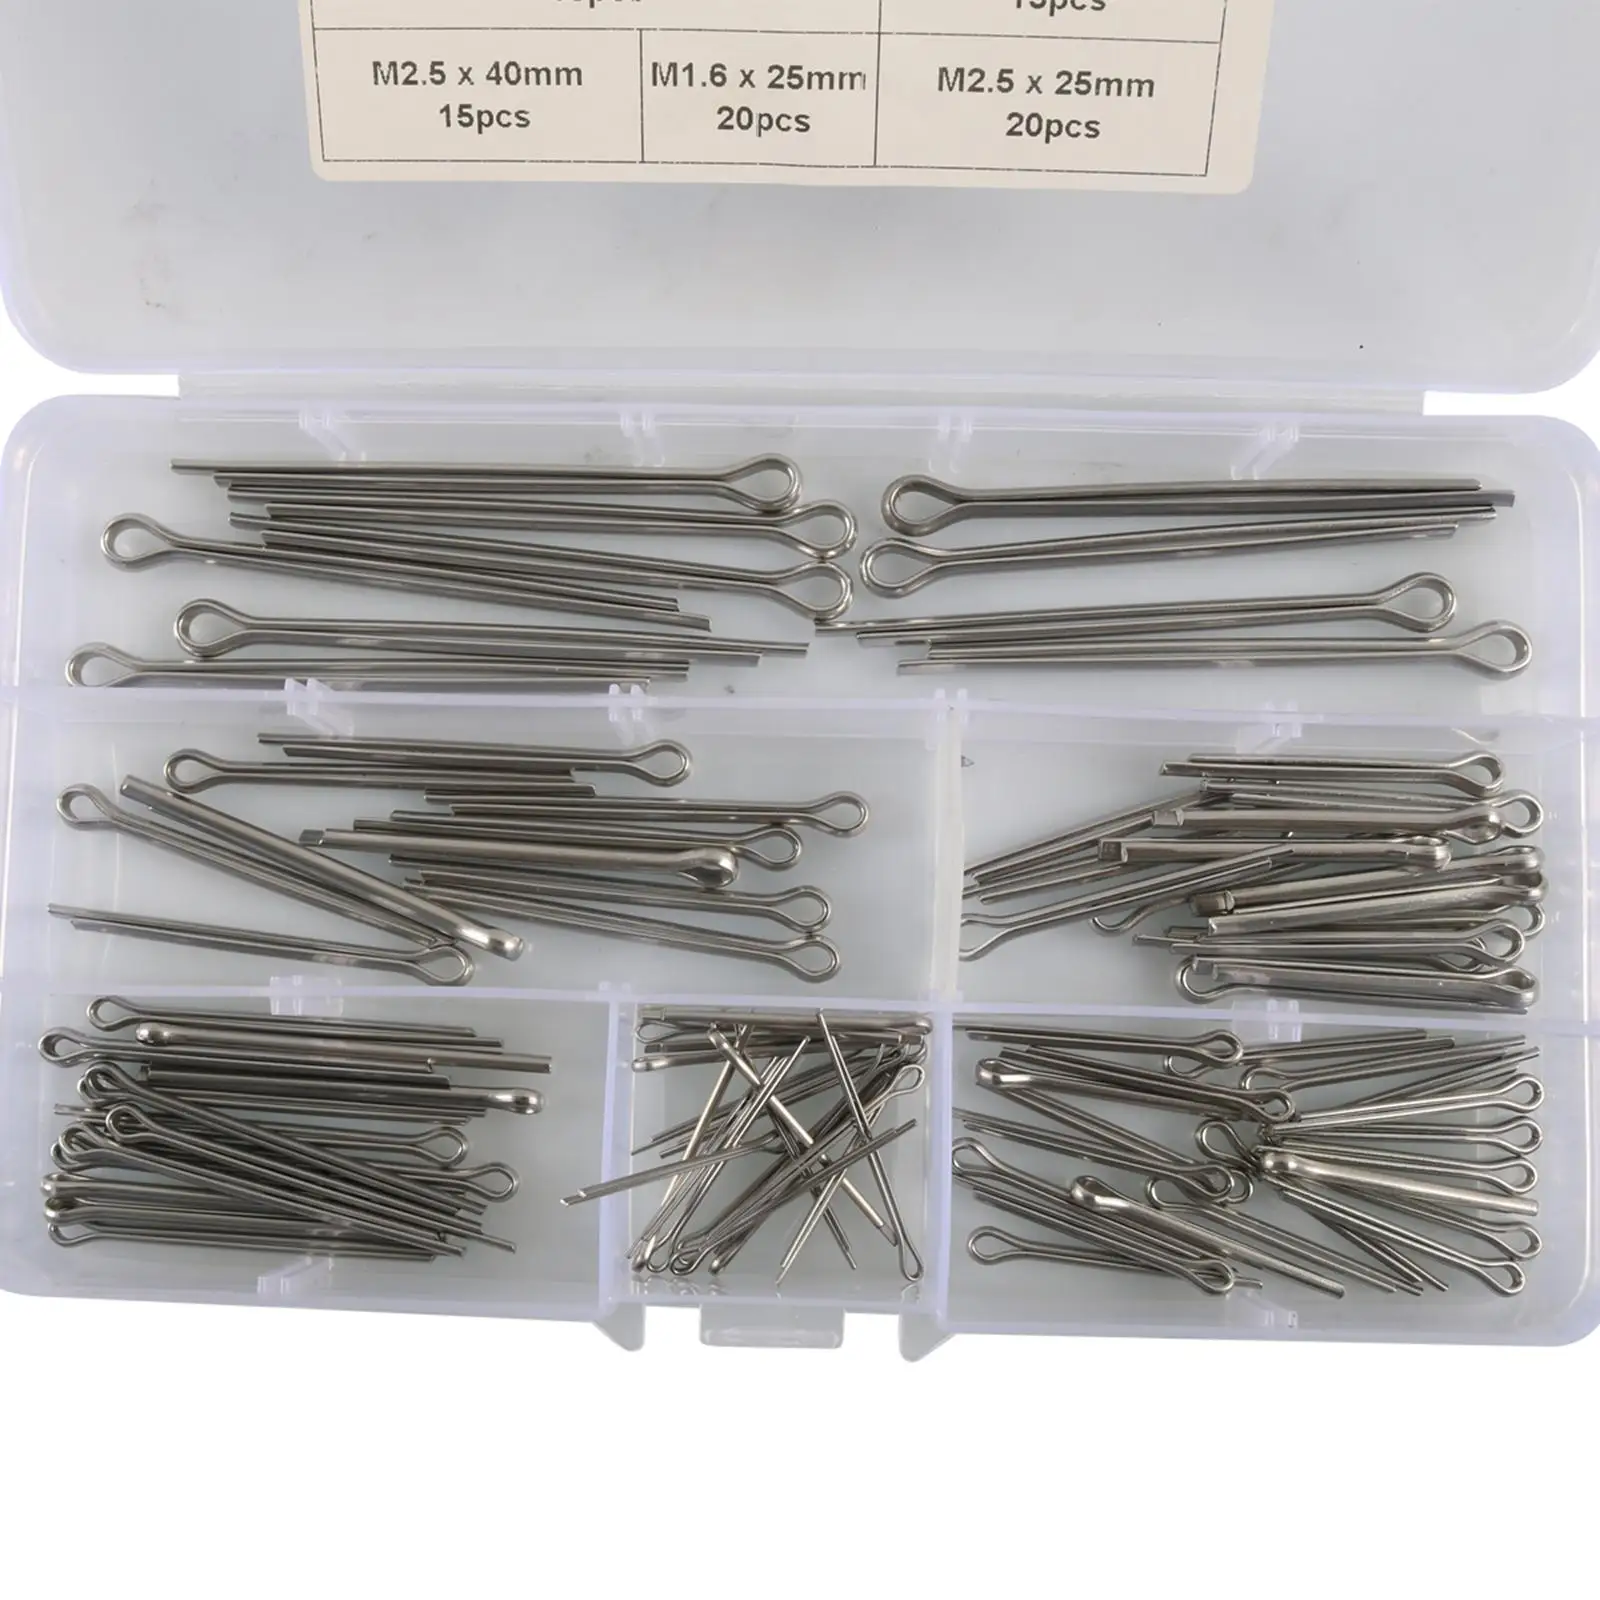 Cotter Pin Assortment Kit with Storage Box 6 Sizes Heavy Duty Cotter Pin Clip for Truck Car Garage Garden Equipment Car